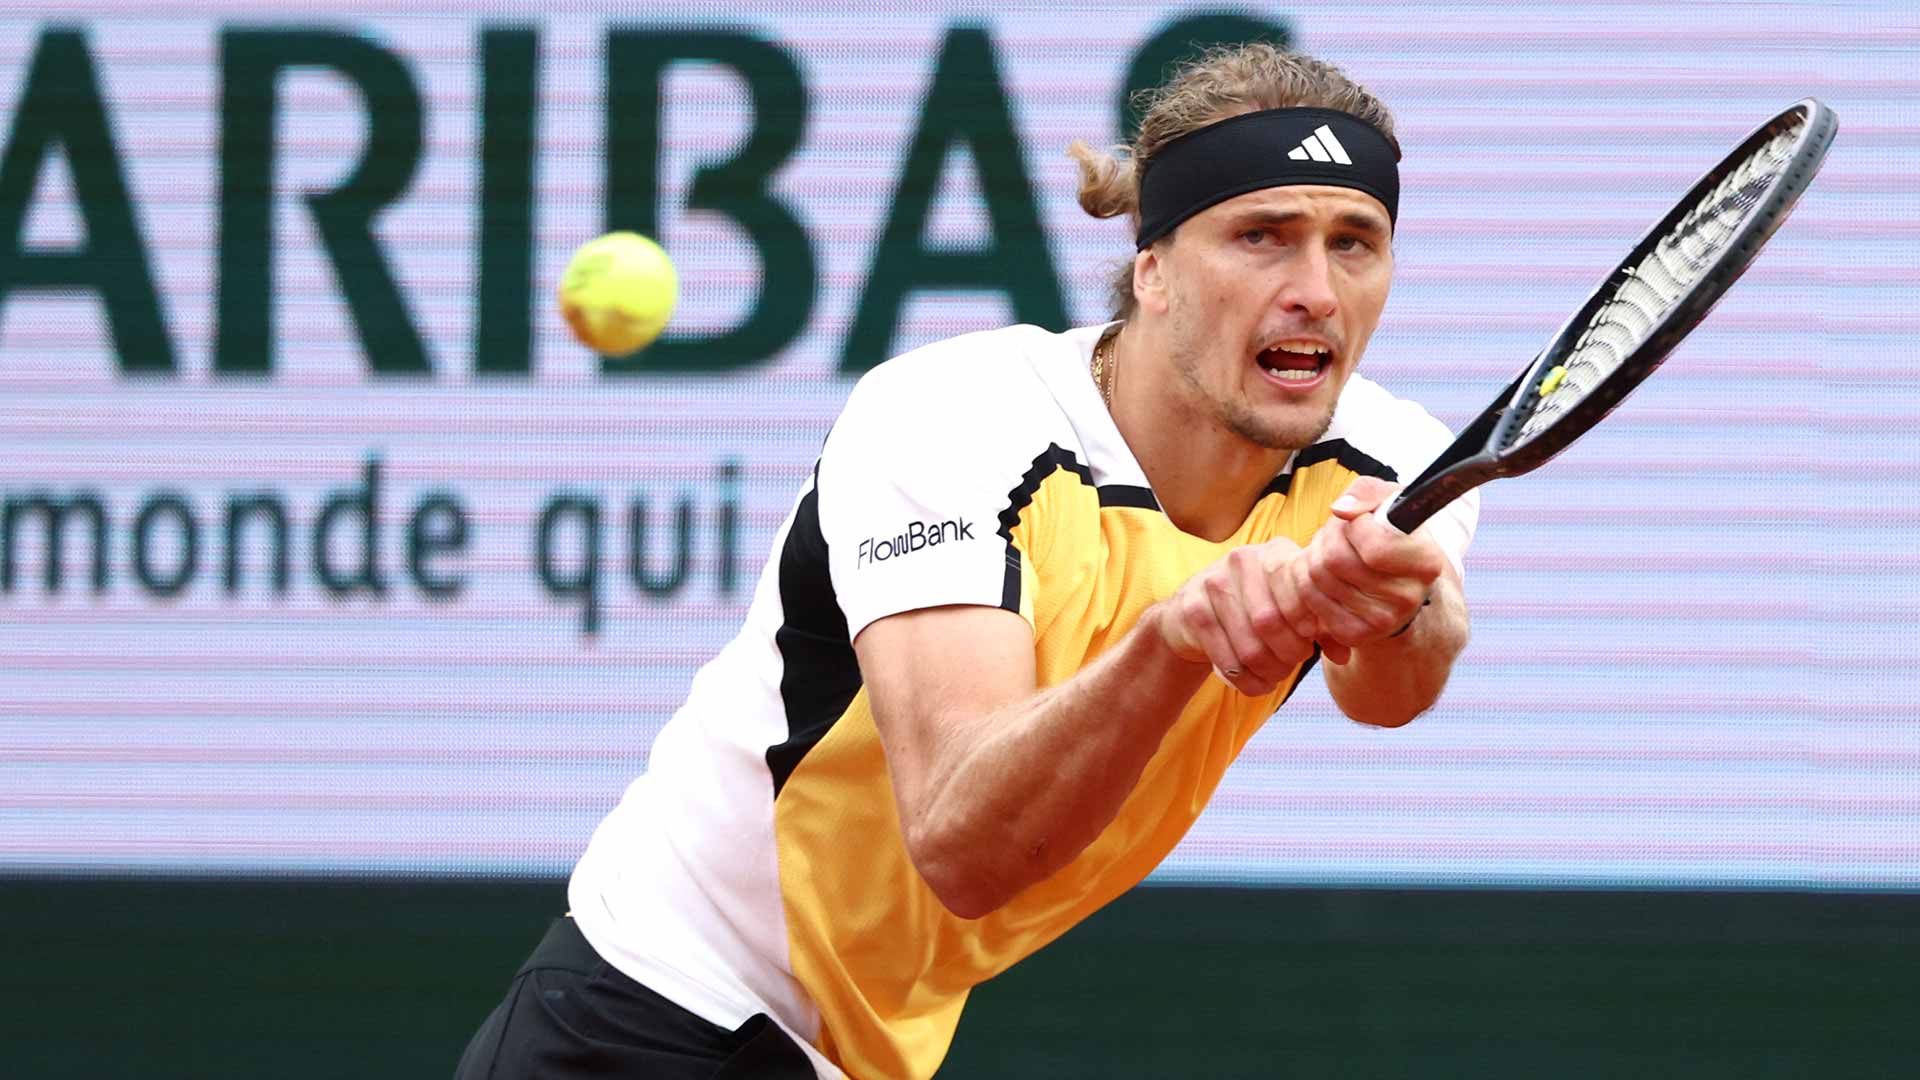 Zverev backs up Nadal win with Goffin victory at Roland Garros